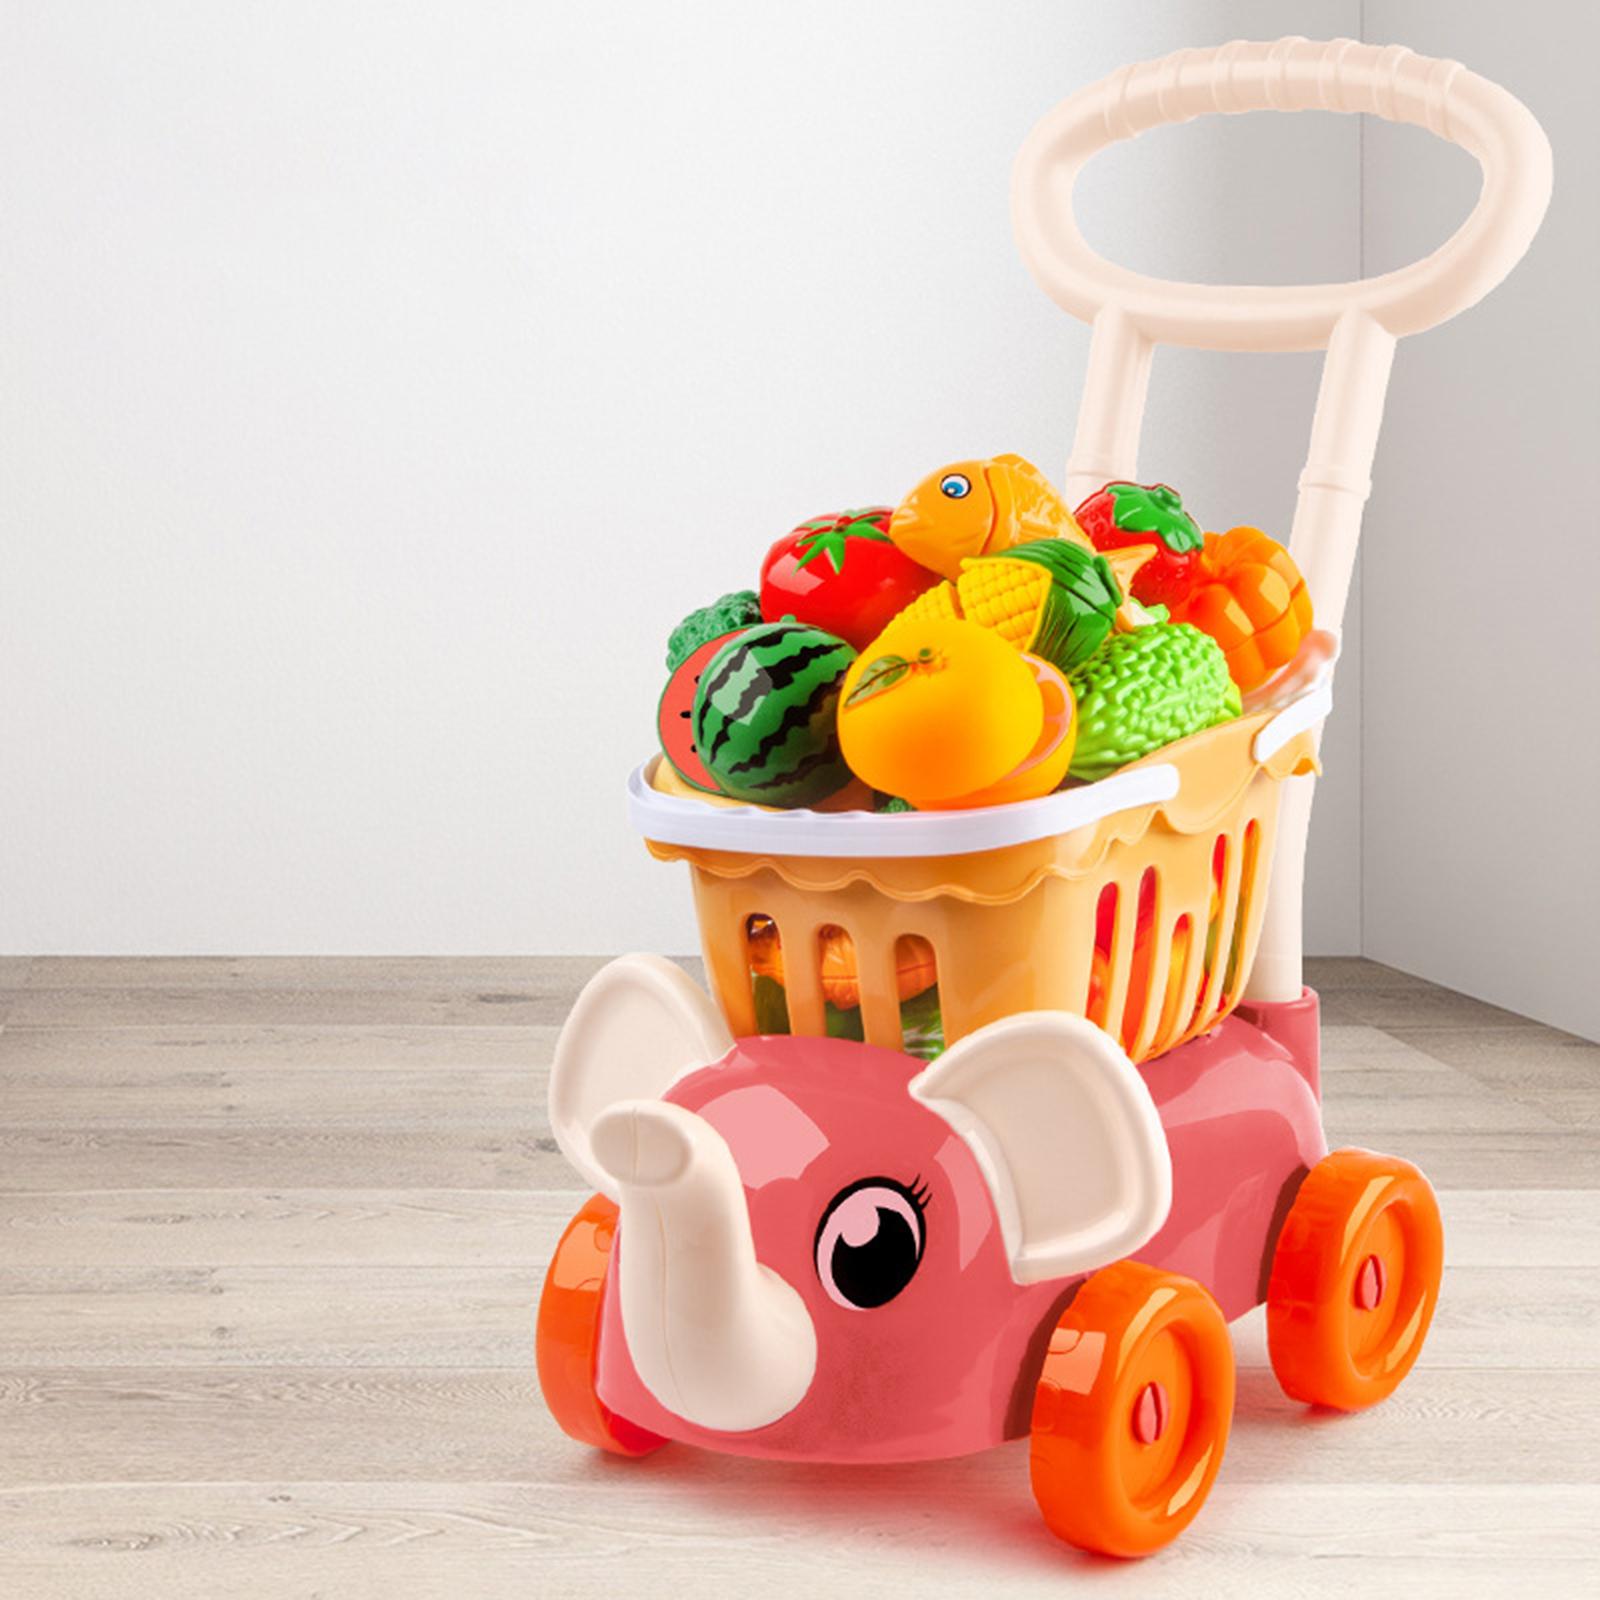 Simulation Deluxe Shopping Cart, Fruit and Cutting Food Playset Children Preschool Groceries Role toys